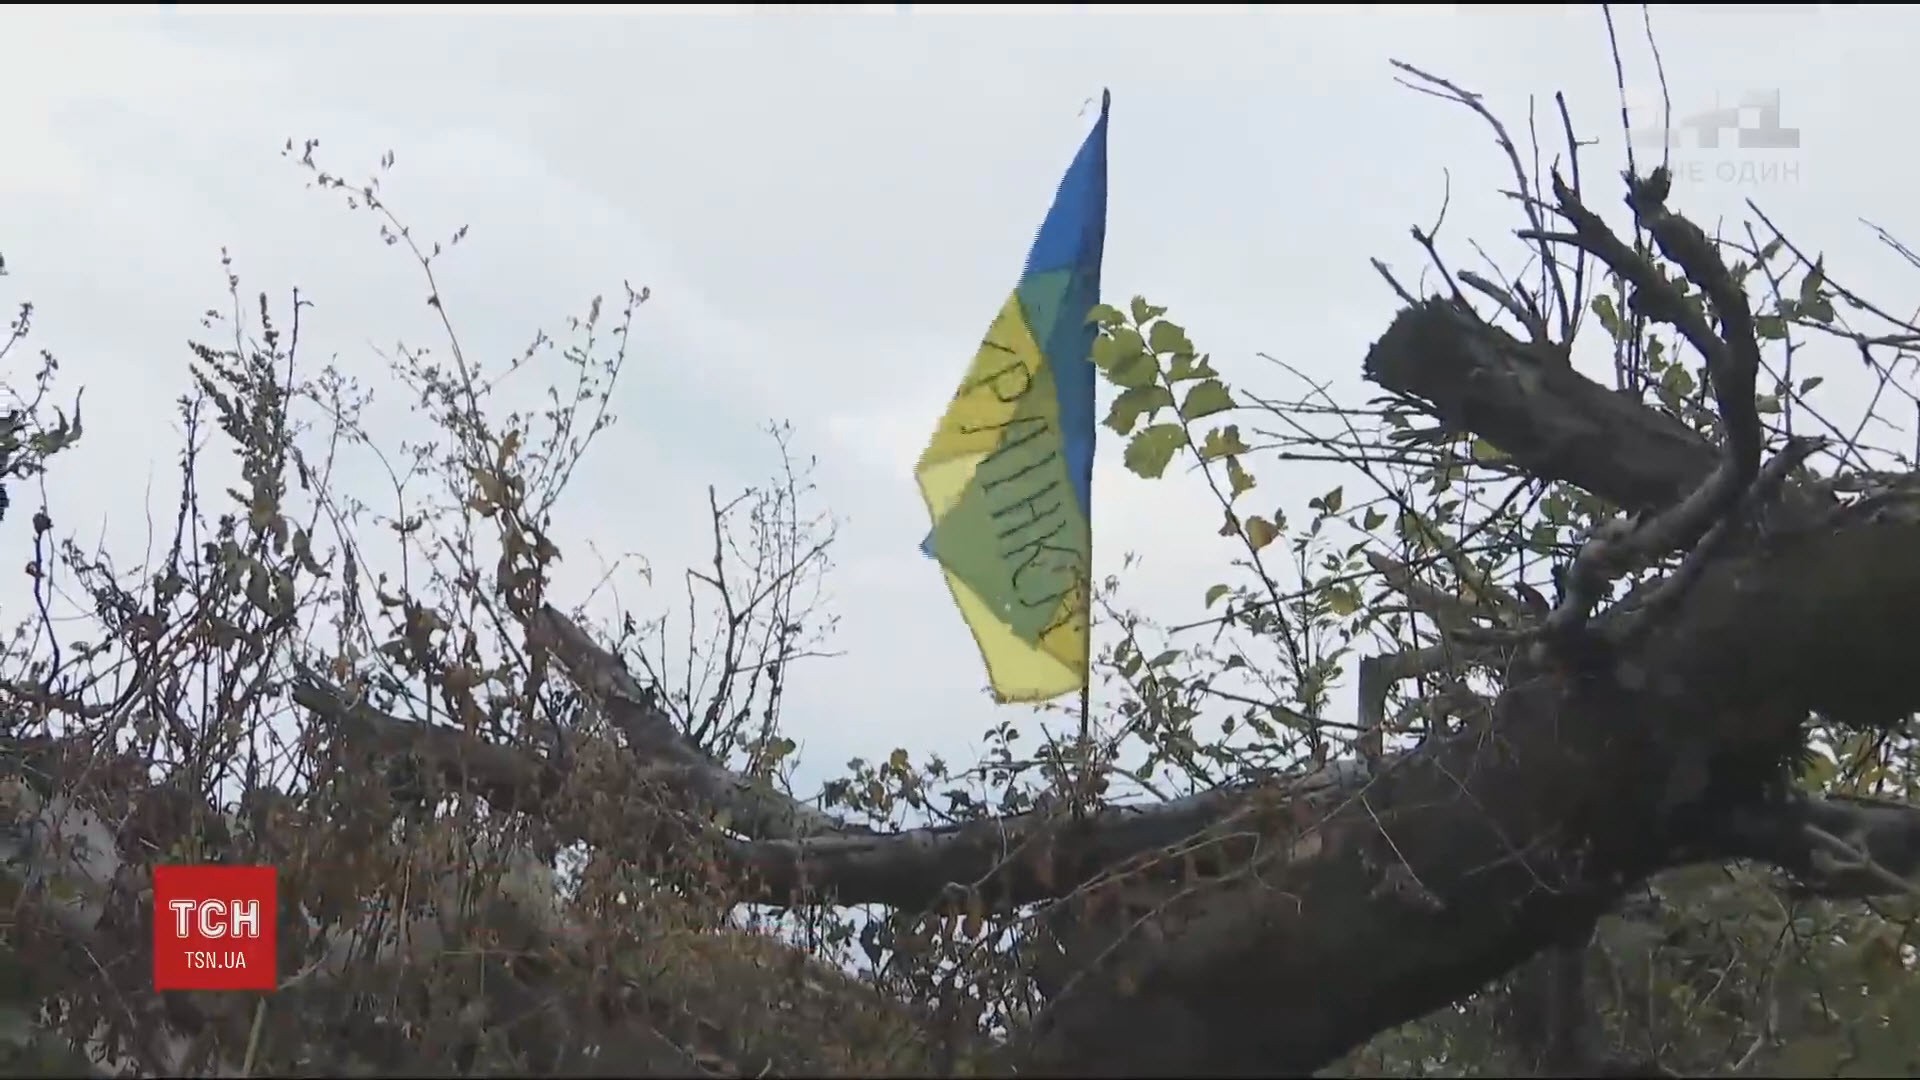 Victory in the Video at Donetsk Airport?